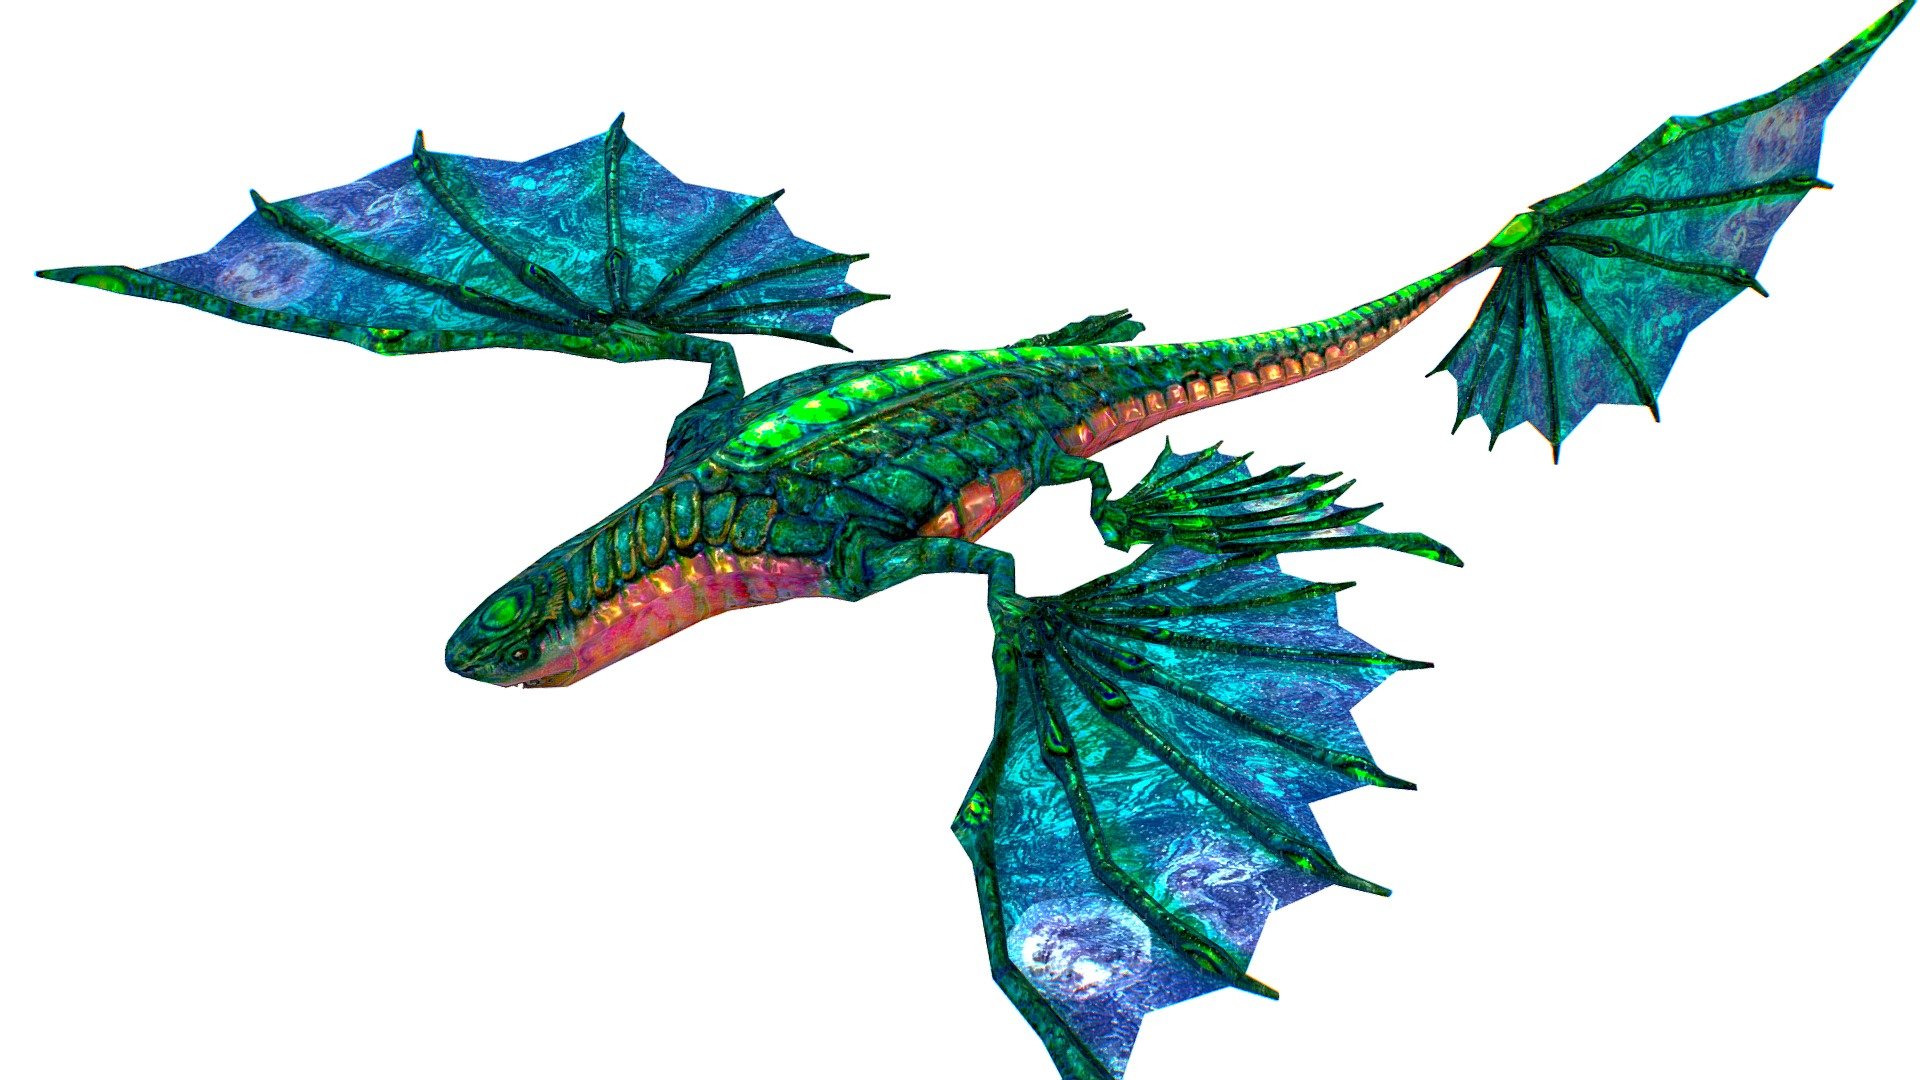 Low Poly model Flying Fantasy Green Dragon
2048x2048 TGA texture (color, normal, specular)

13 separated 3dsMax file animation: attack, death, escape_attack, idle, pre_attack, roll_left, roll_right, rotate_left, rotate_right, strafe_left, strafe_left_attack, strafe_right, taken_damage.

3dsMax file encluded
 - Low Poly model Flying Fantasy Green Dragon - Buy Royalty Free 3D model by Oleg Shuldiakov (@olegshuldiakov) 3d model